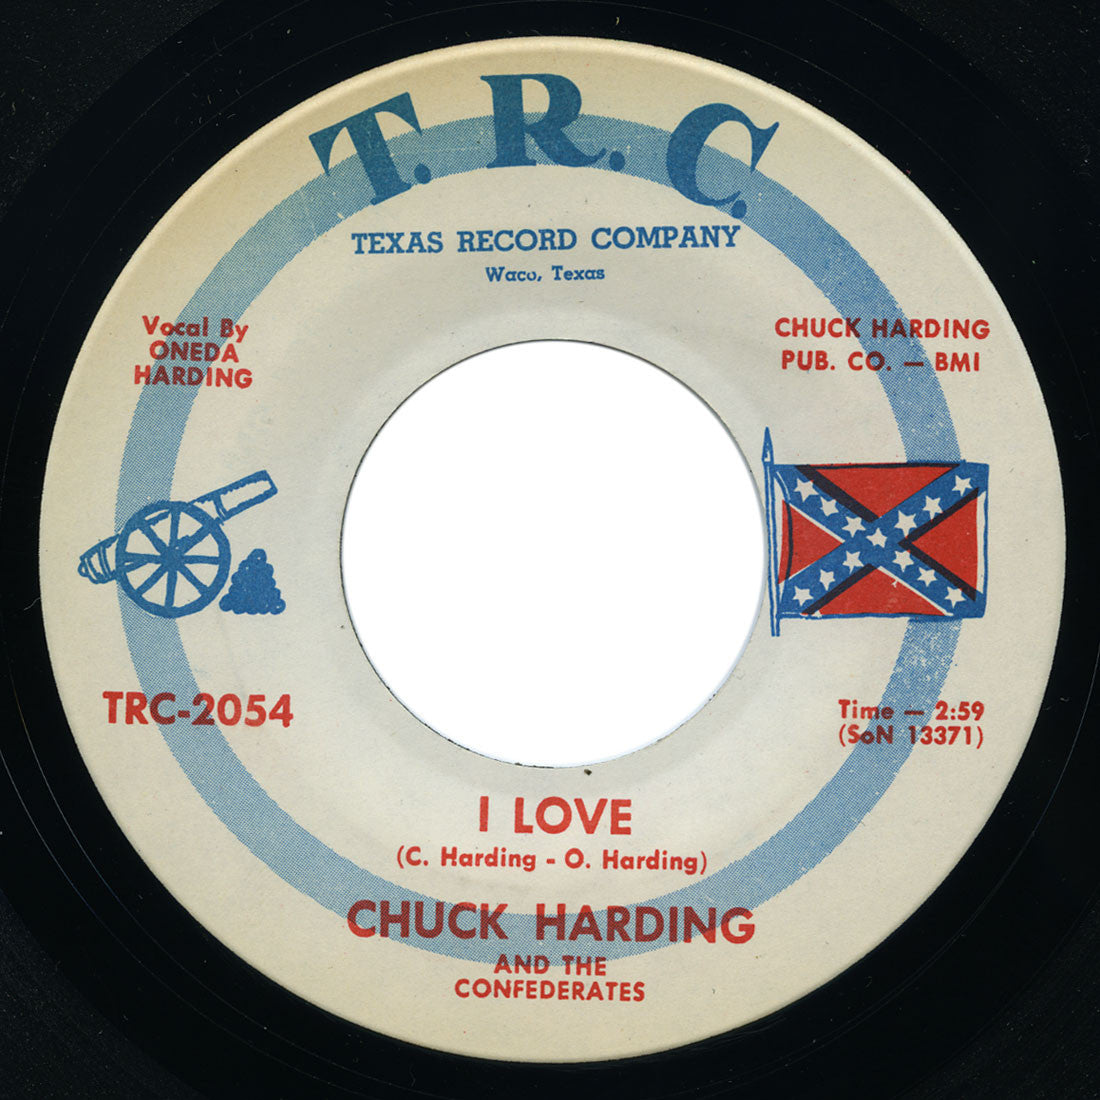 Chuck Harding and The Confederates - Sidewinder / I Love - T.R.C.